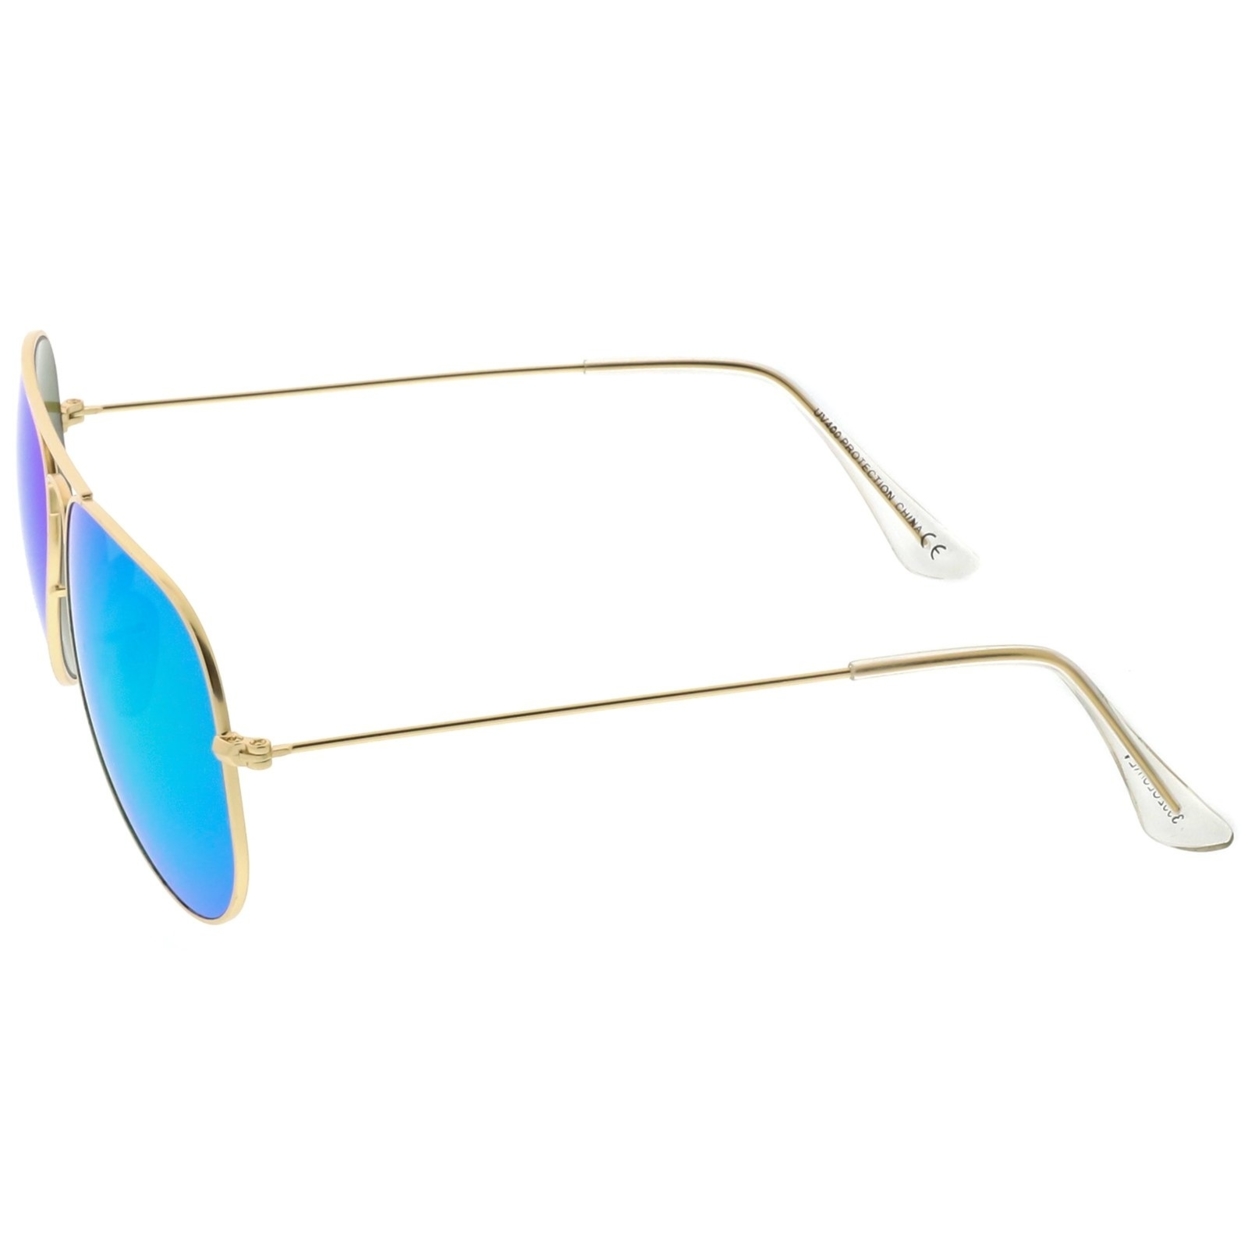 Premium Small Classic Matte Metal Aviator Sunglasses With Colored Mirror Glass Lens 57mm - Gold / Pink Mirror